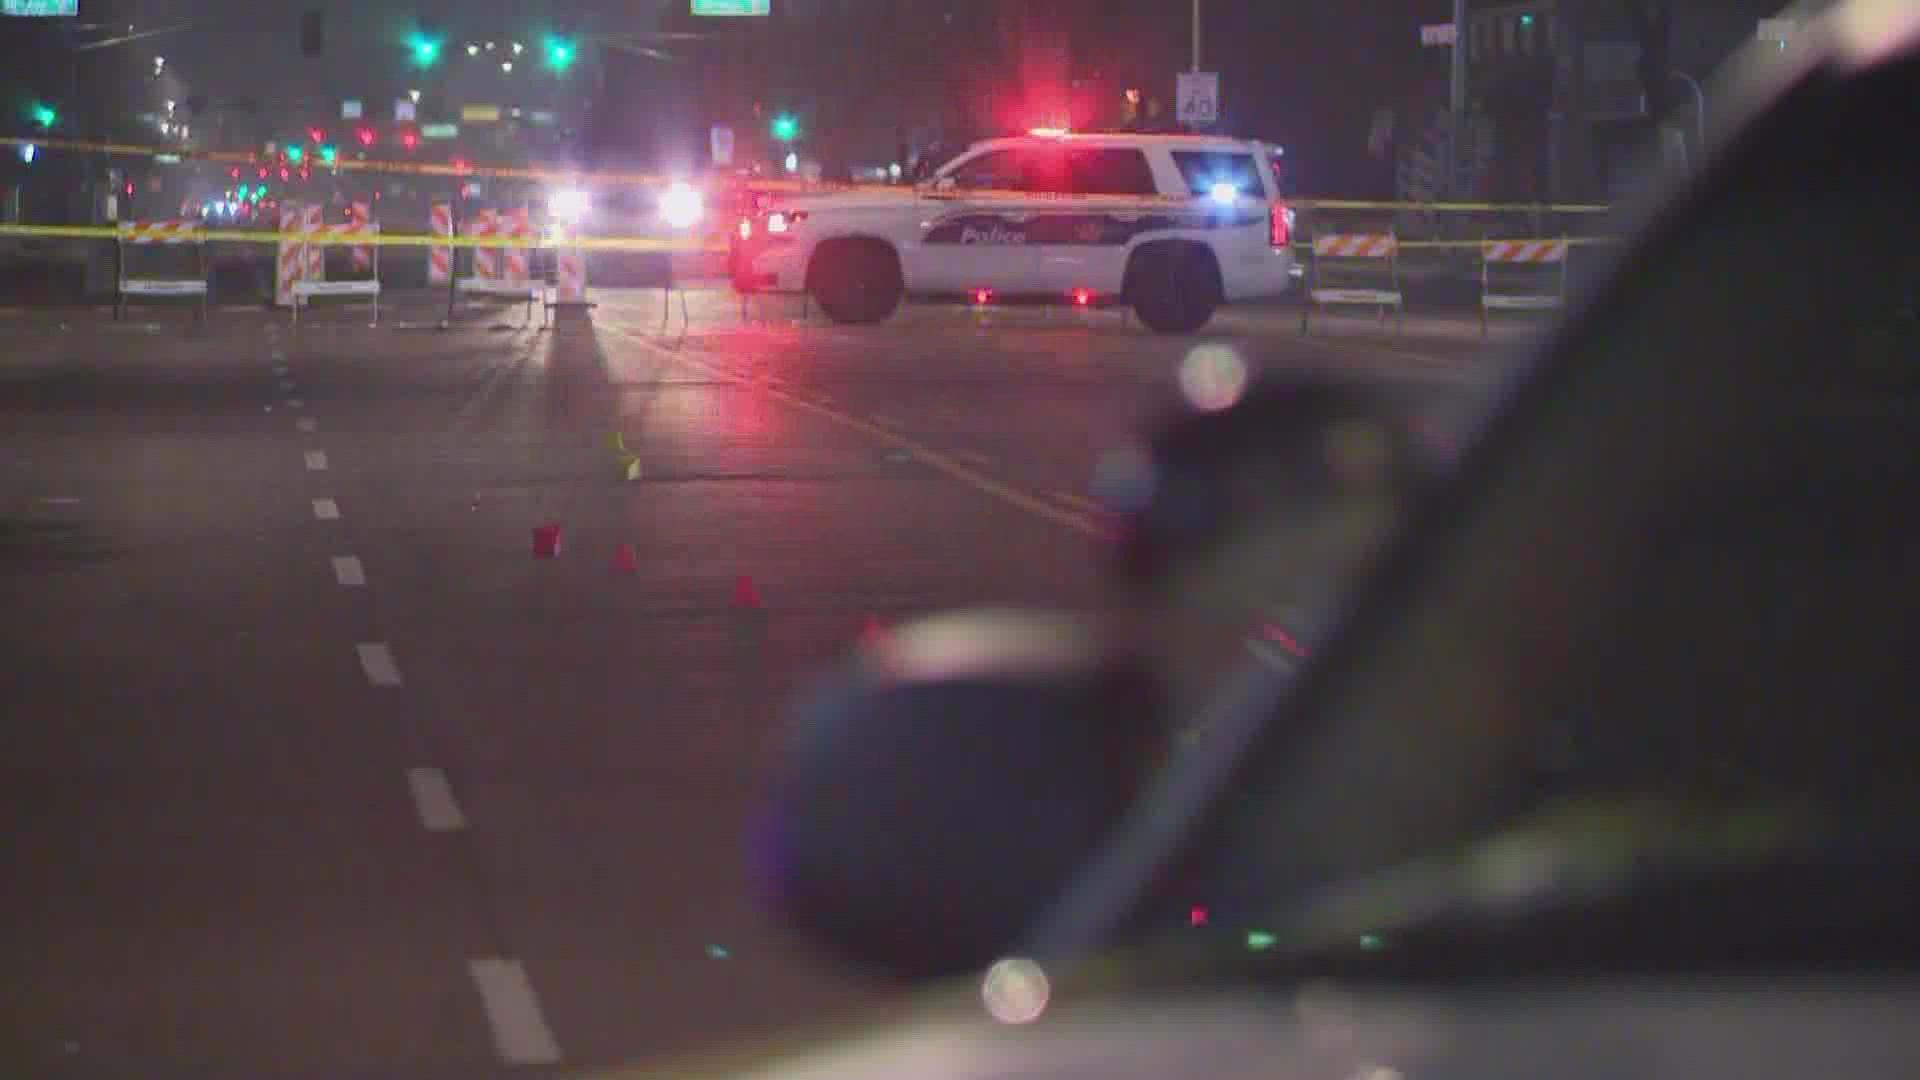 A person is dead after a hit-and-run crash near 36th Avenue and McDowell Road Sunday night. Police are searching for the driver who left the scene.